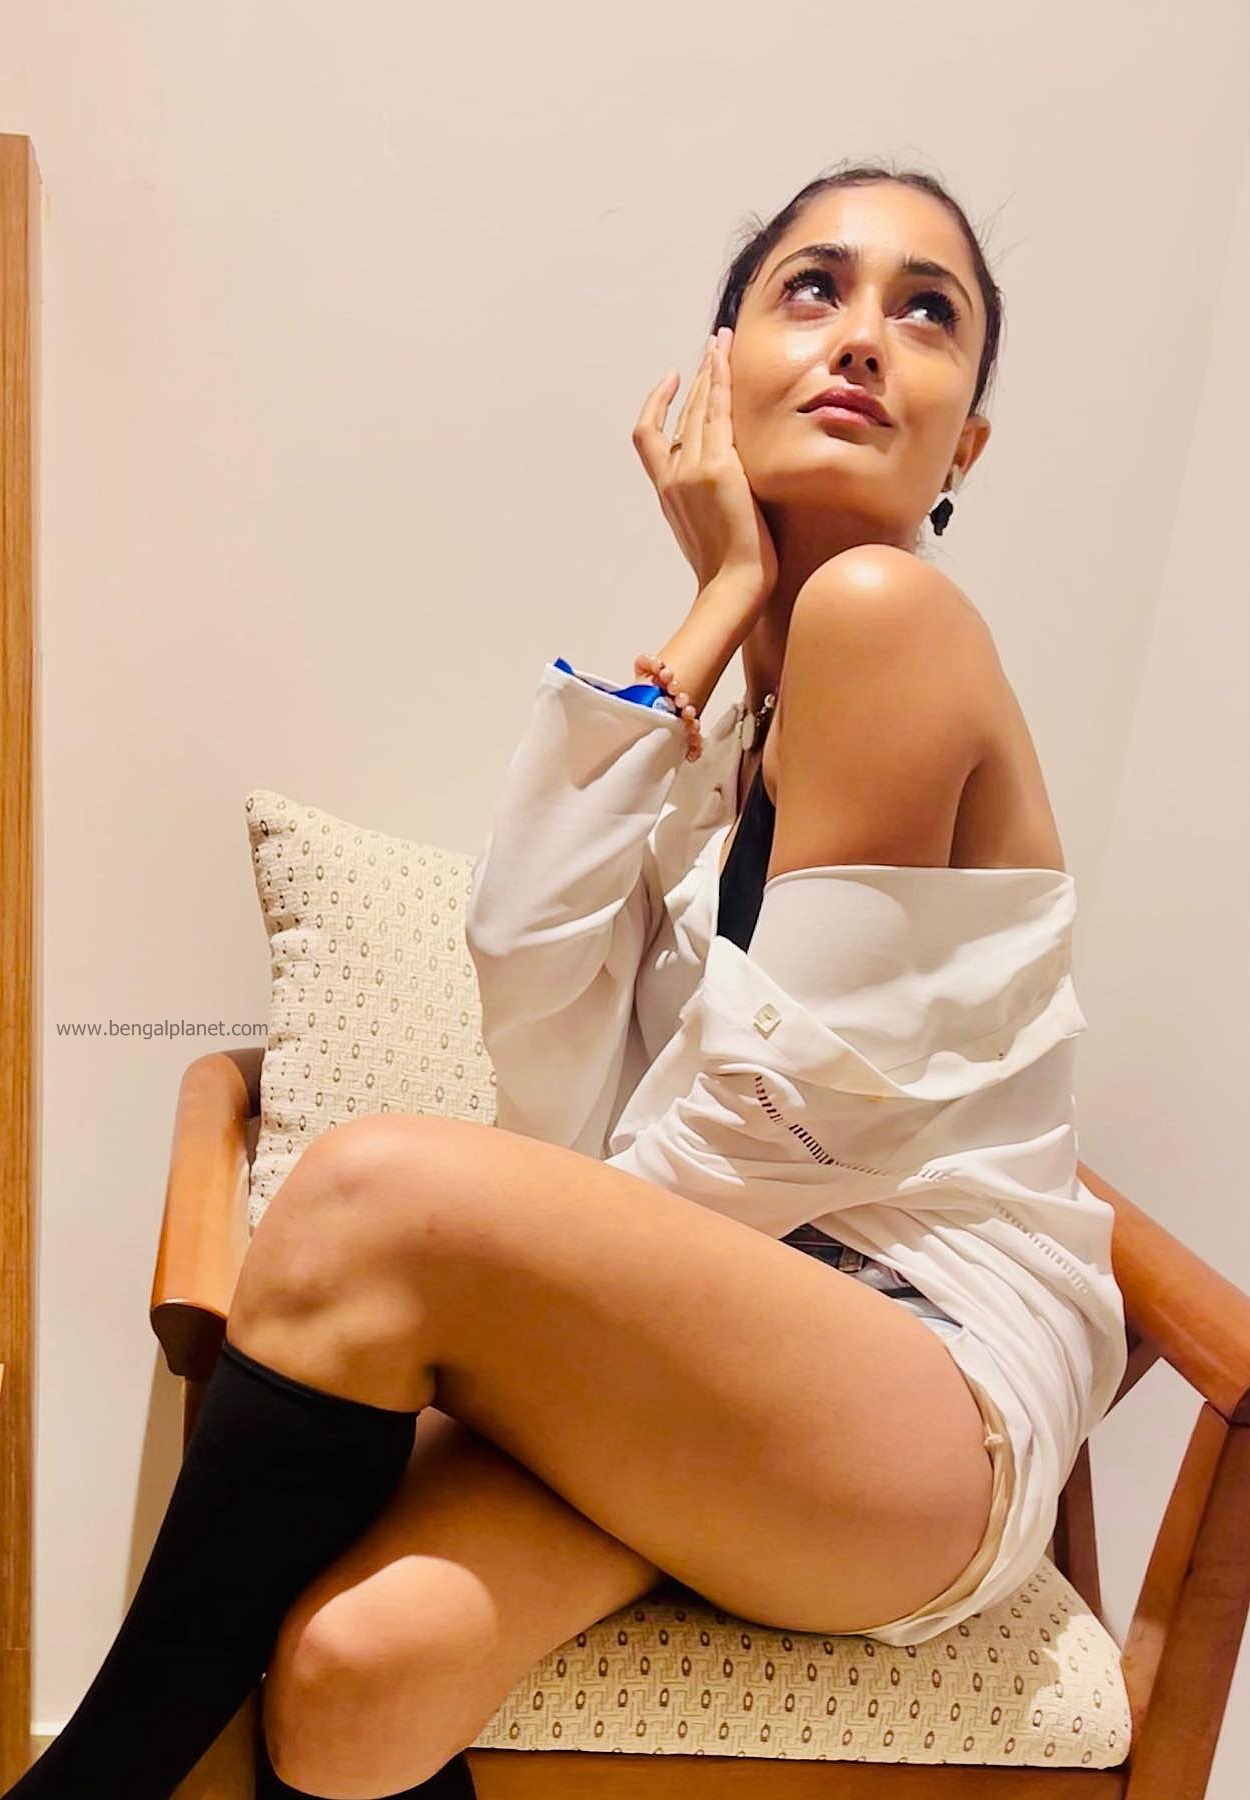 Tridha-Choudhury-looks-chic-hot-and-classy-in-these-pictures-55-Bengalplanet.com